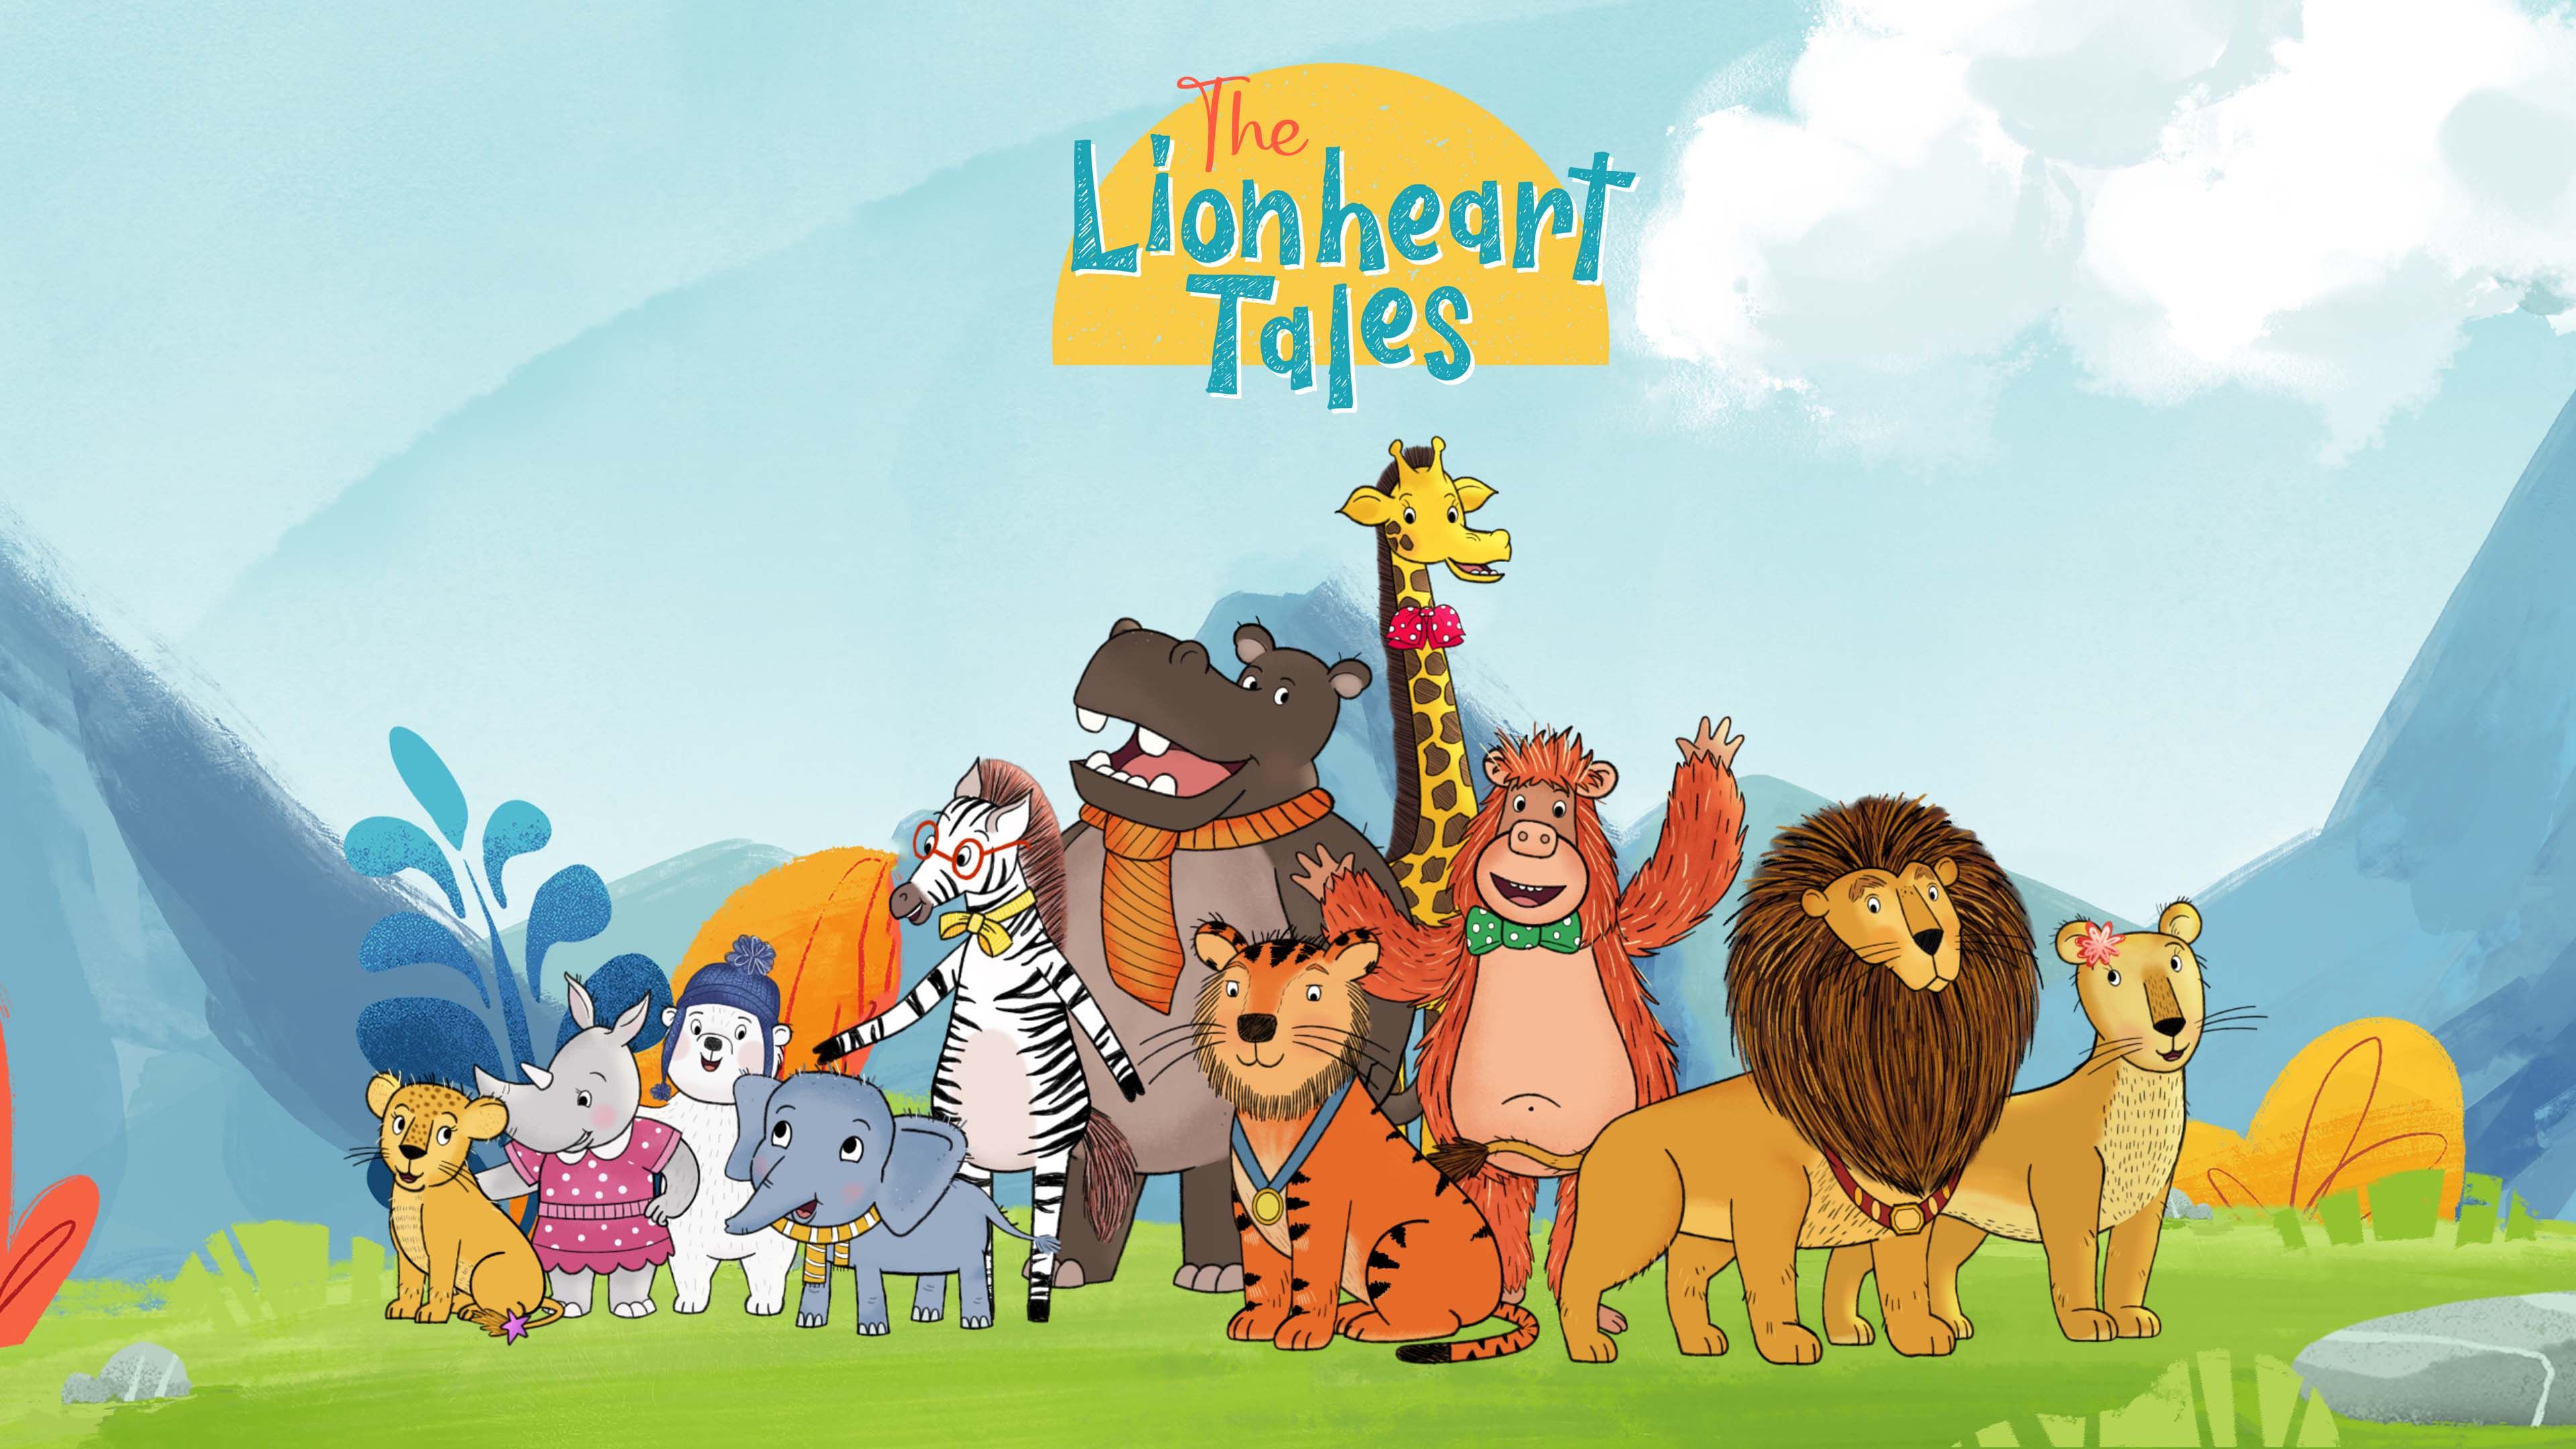 The Lionheart Tales set to run wild at The Baby Show